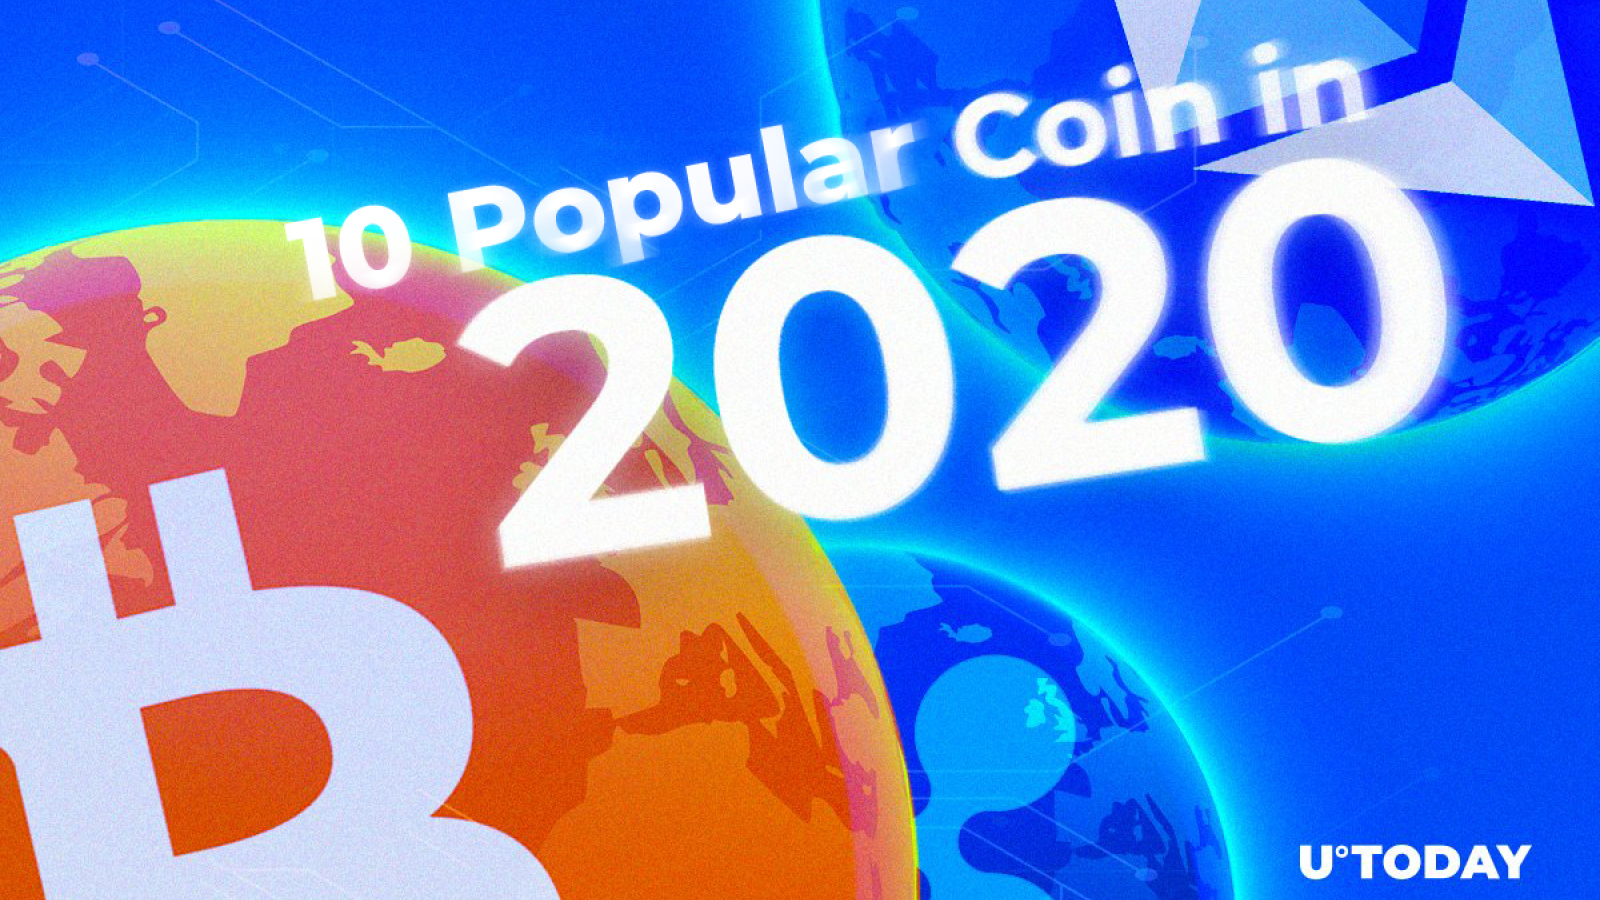 altcoins set to explode in 2020